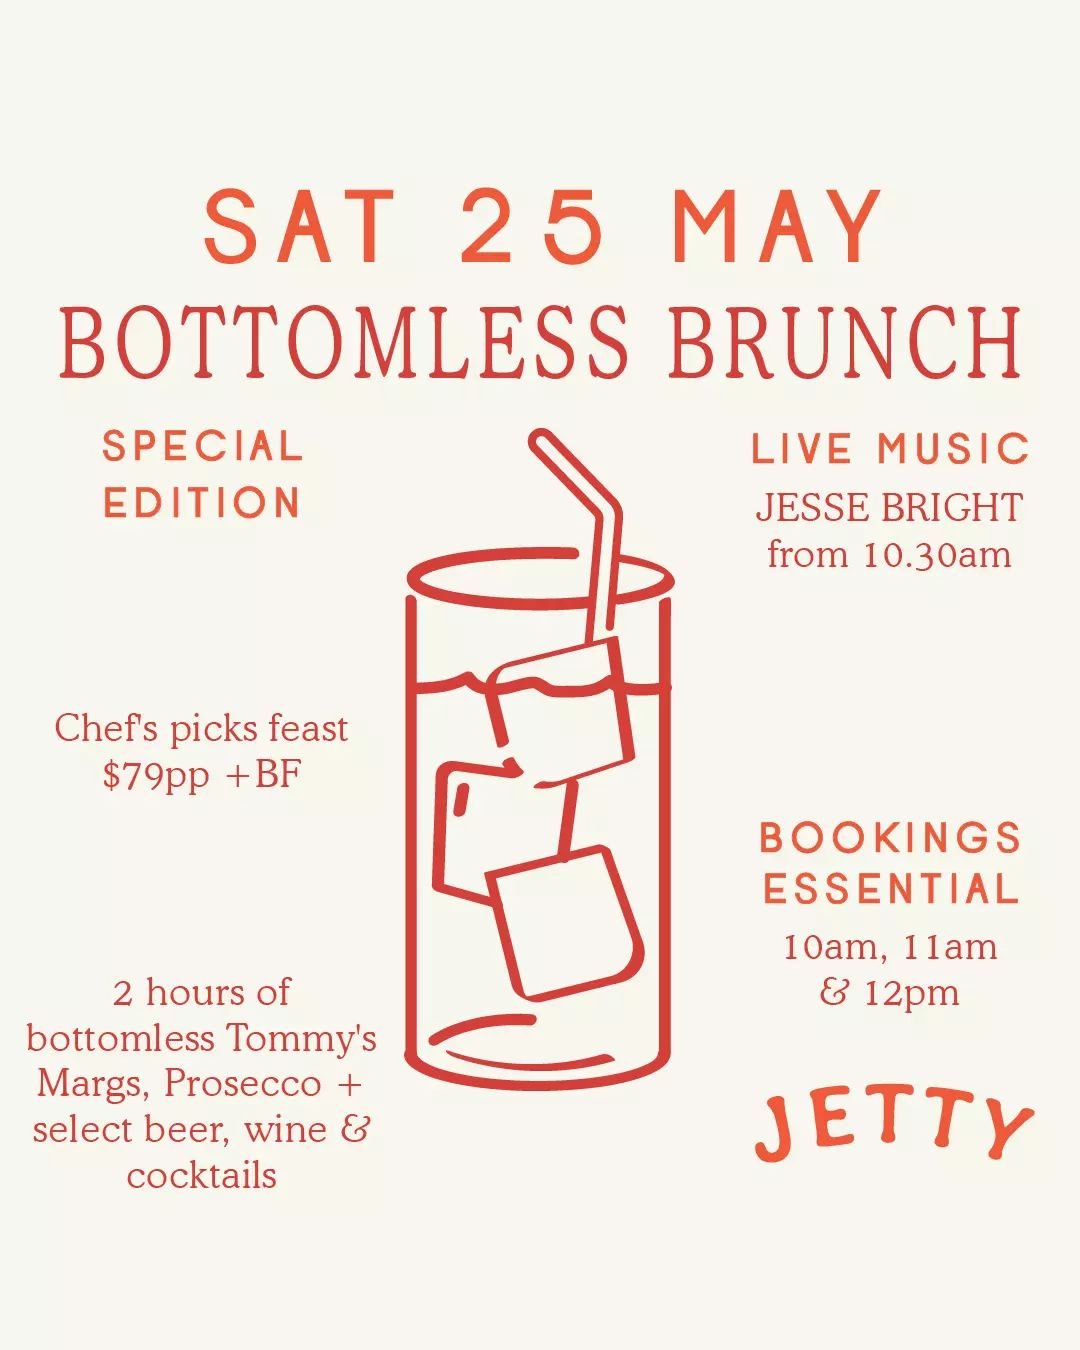 Join us for a special edition of Bottomless Brunch on Saturday 25 May! You&rsquo;ll be serenaded by talented local muso, Jesse Bright&nbsp;🥂🎶 

Enjoy Chef&rsquo;s brunch picks with 2 hours of free-flowing bottomless Tommy&rsquo;s Margaritas, Prosec